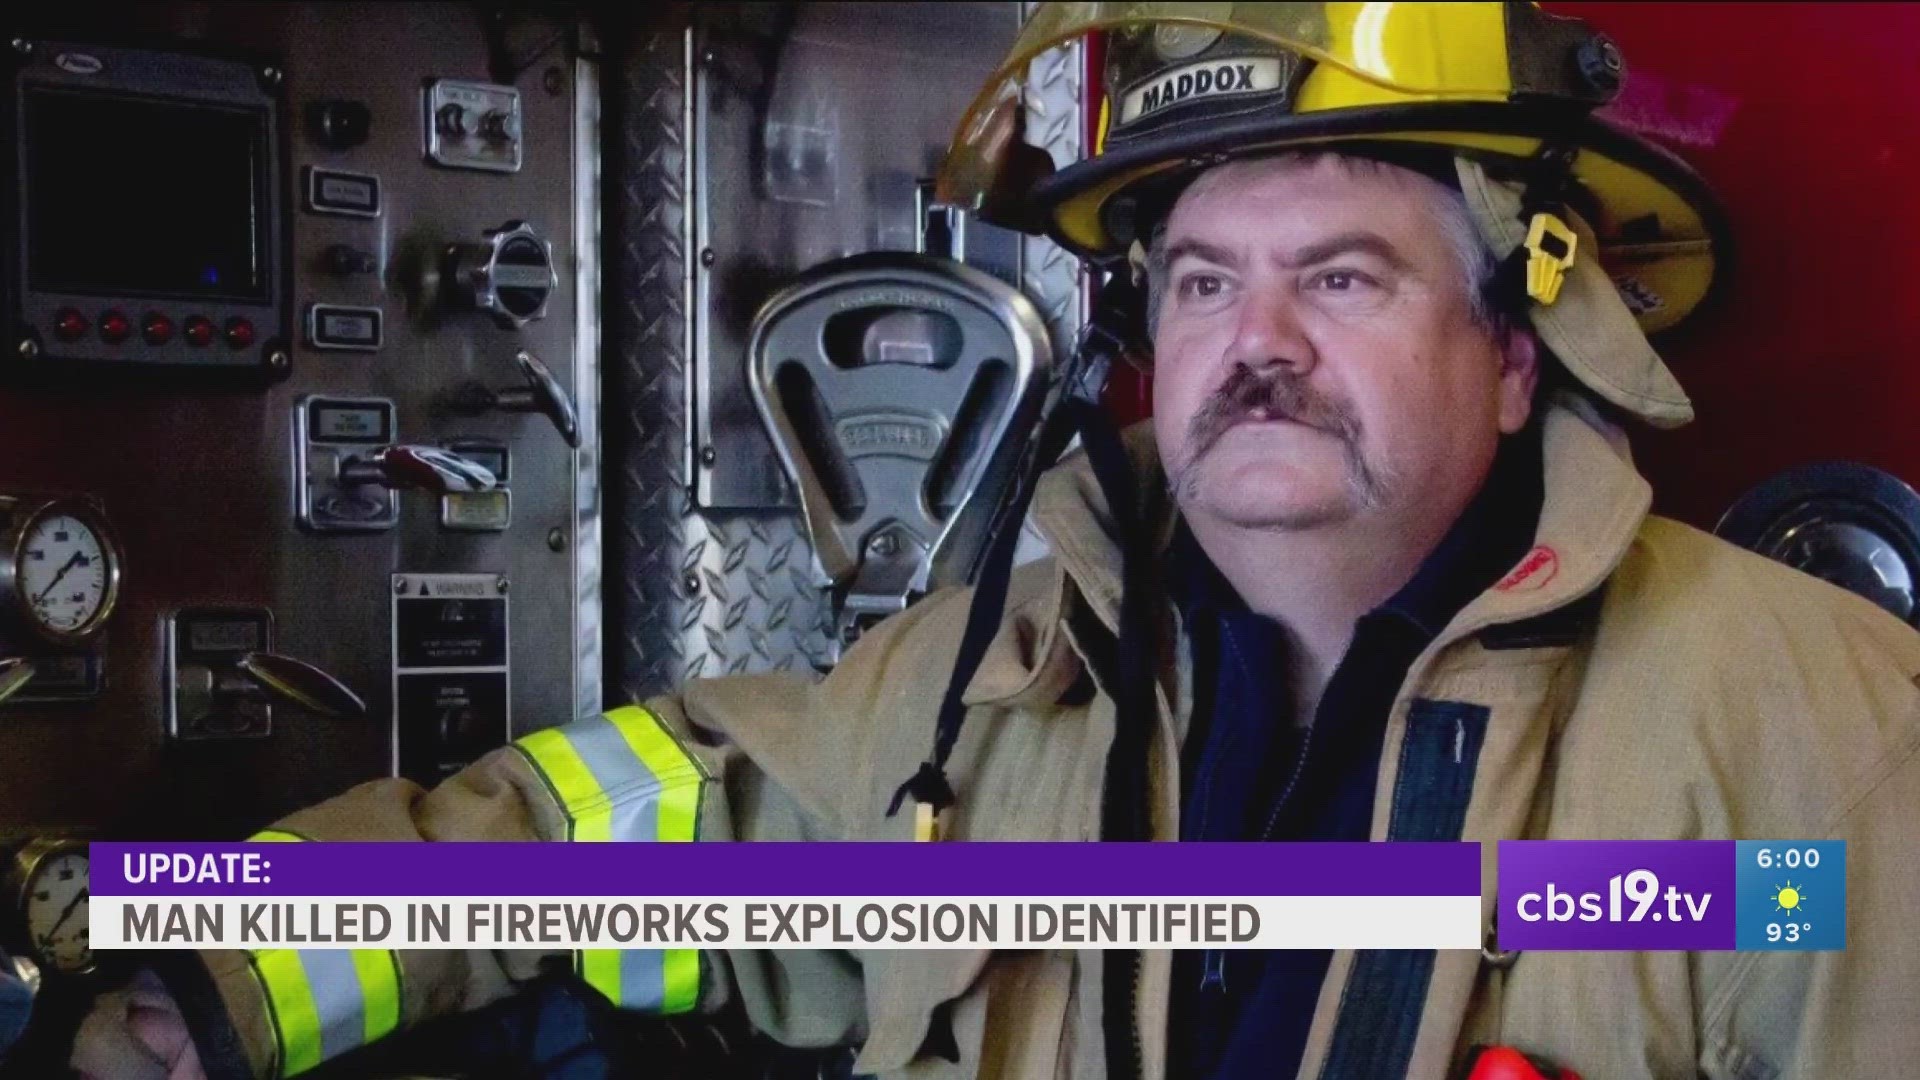 Jared Maddox helped create memories that would last a lifetime in the same place he tragically lost his life at Firehouse 9.